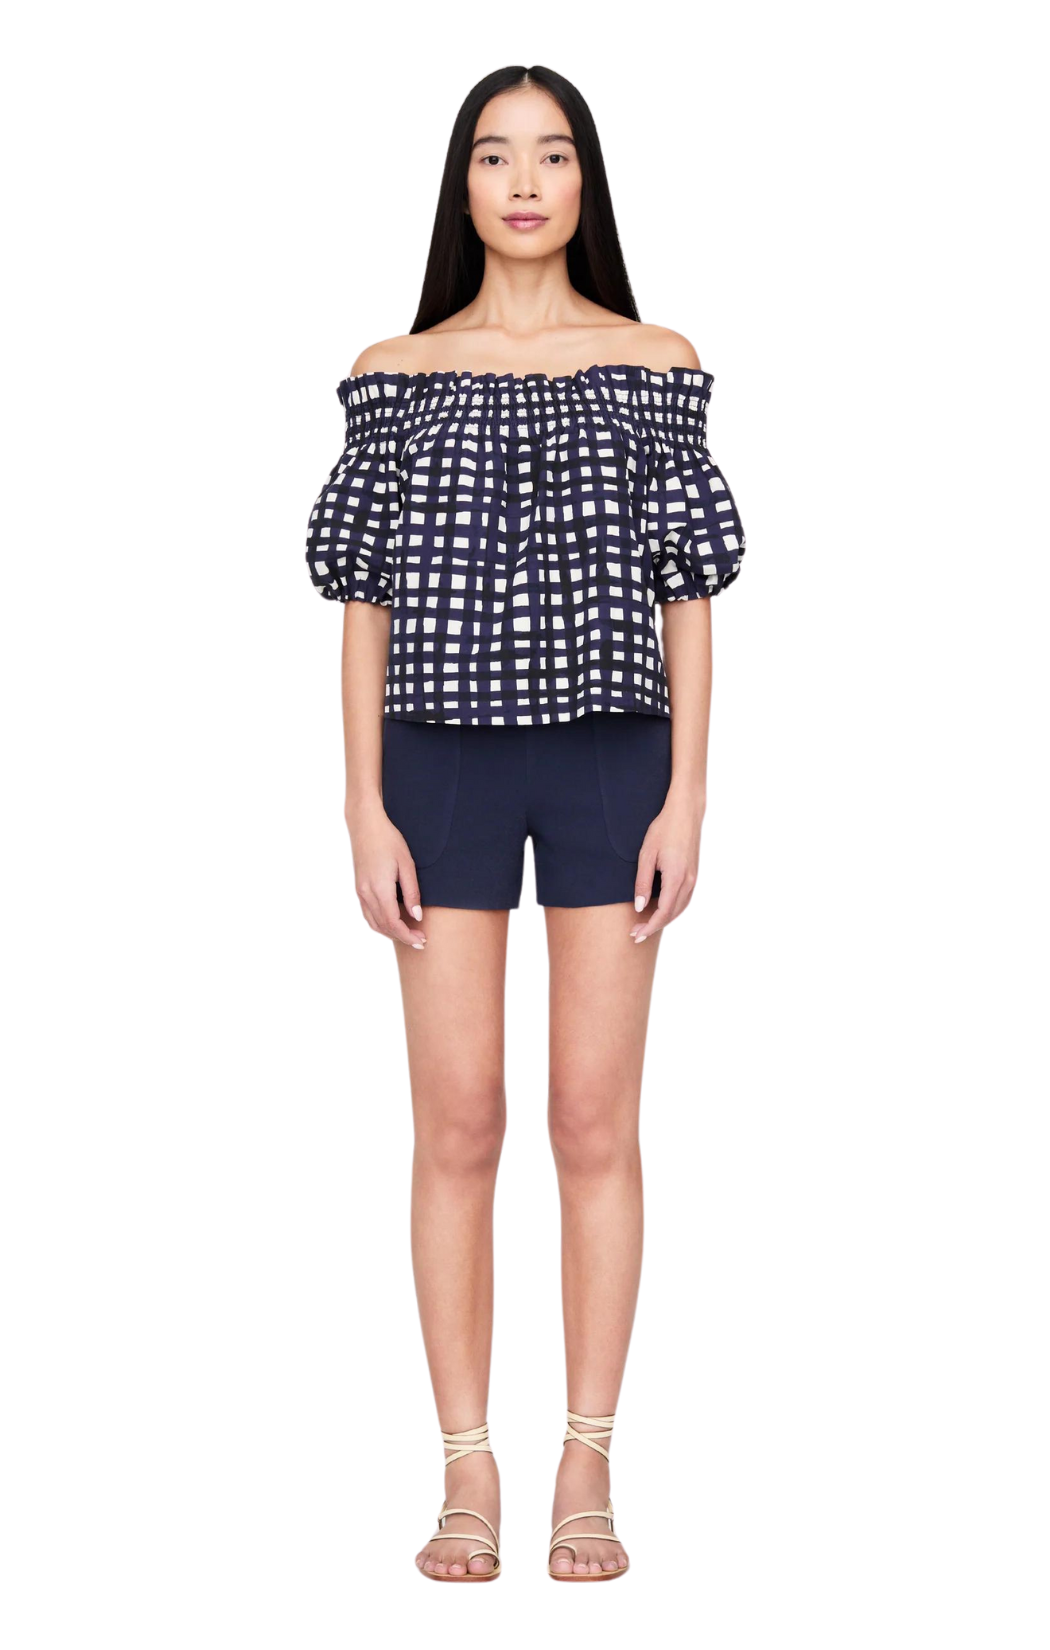 Marie Oliver Printed Off The shoulder top blouse marine blue and white Elodie Top